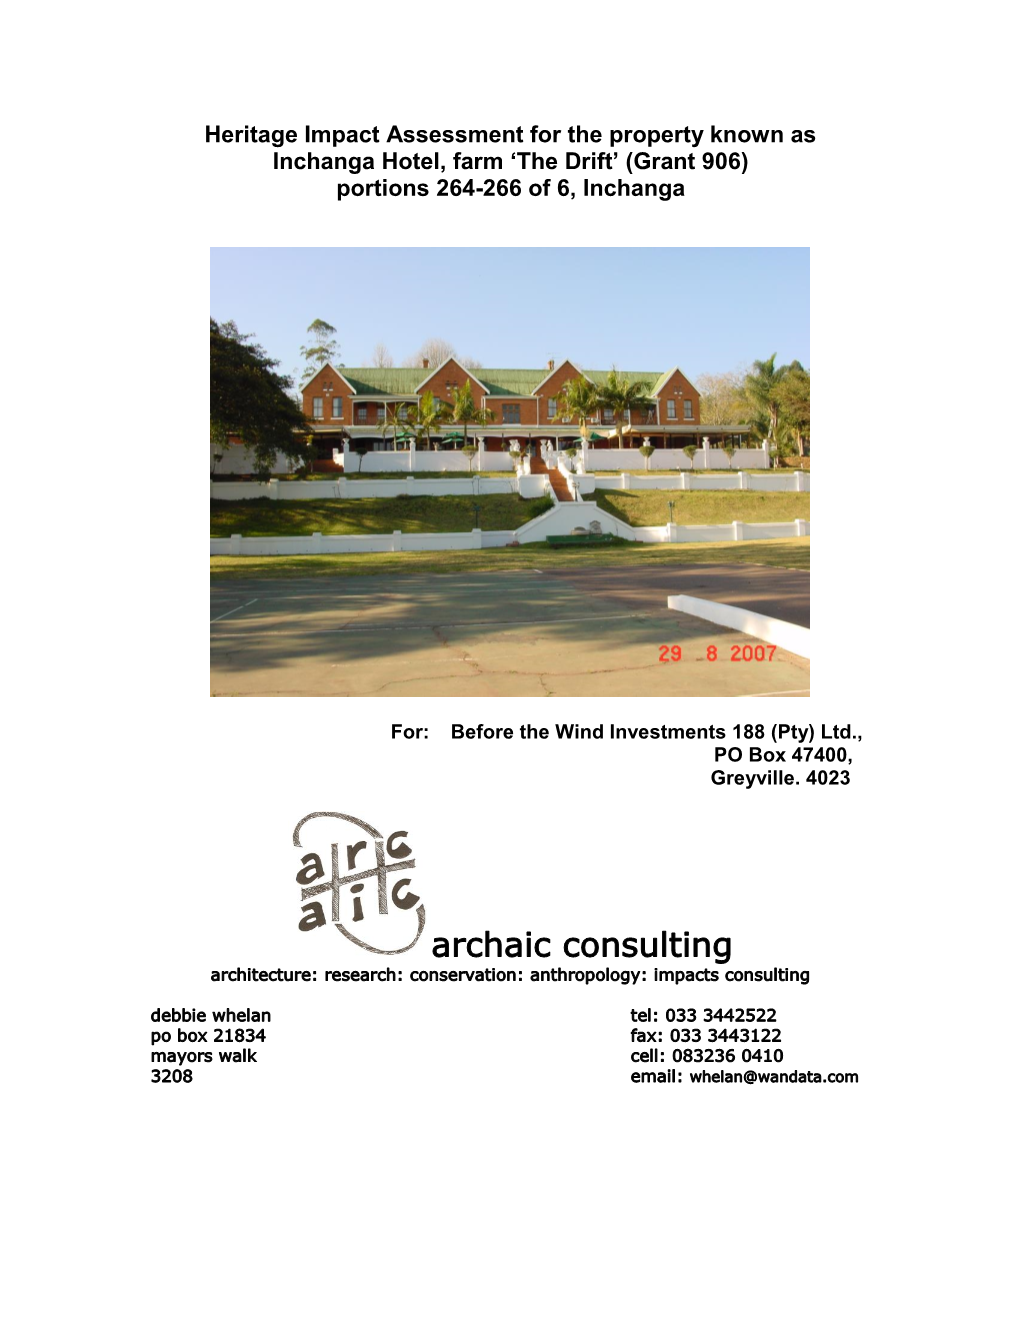 Archaic Consulting